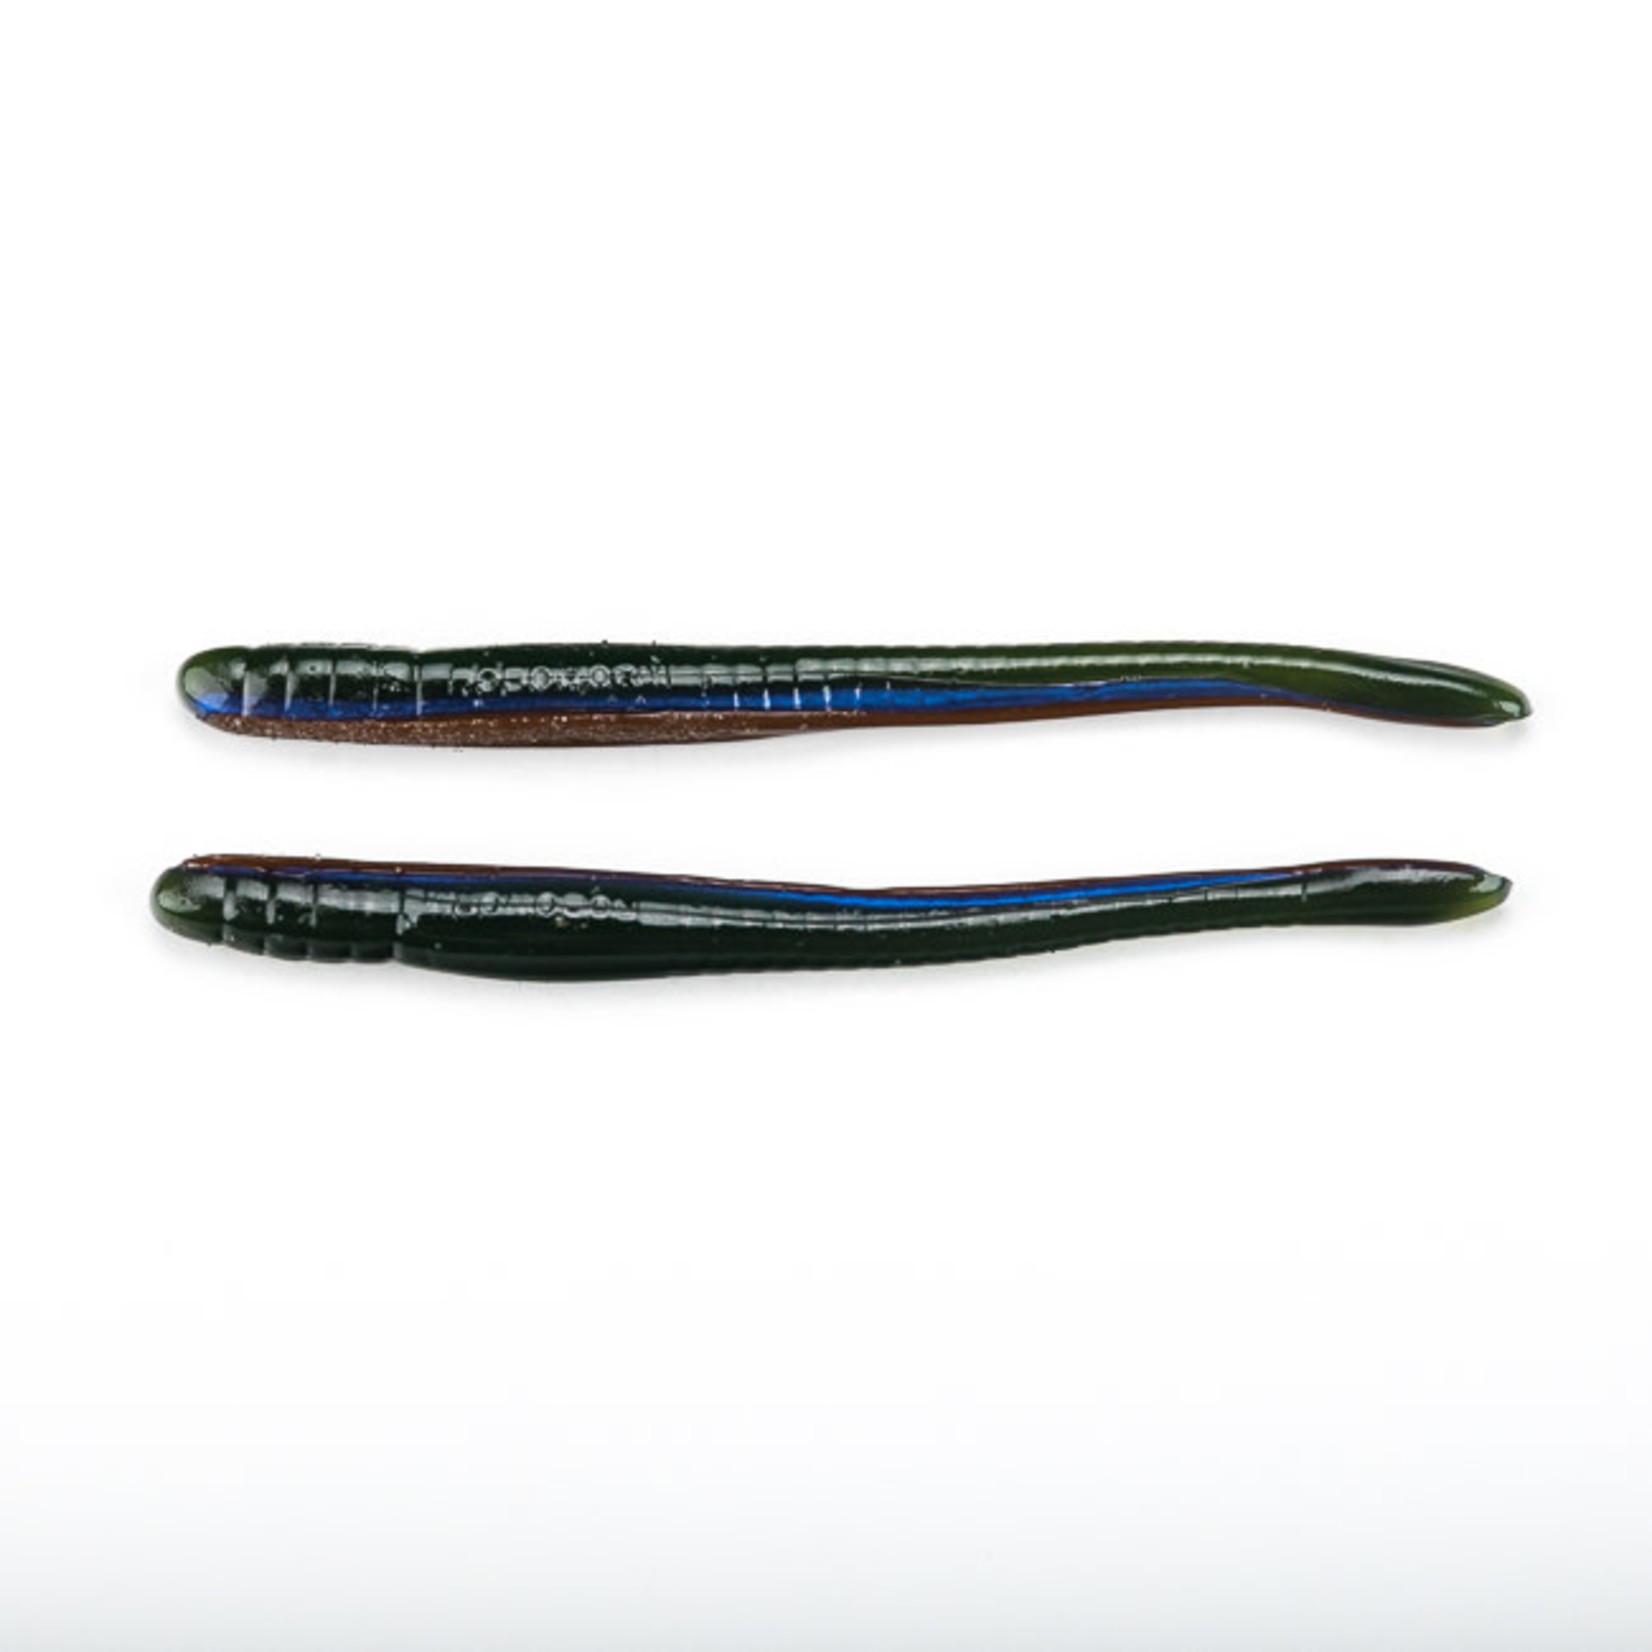 Roboworm Roboworm SK-8296 FAT Straight Tail Worm, 4 .5", Aaron's Magic, 8/Pack